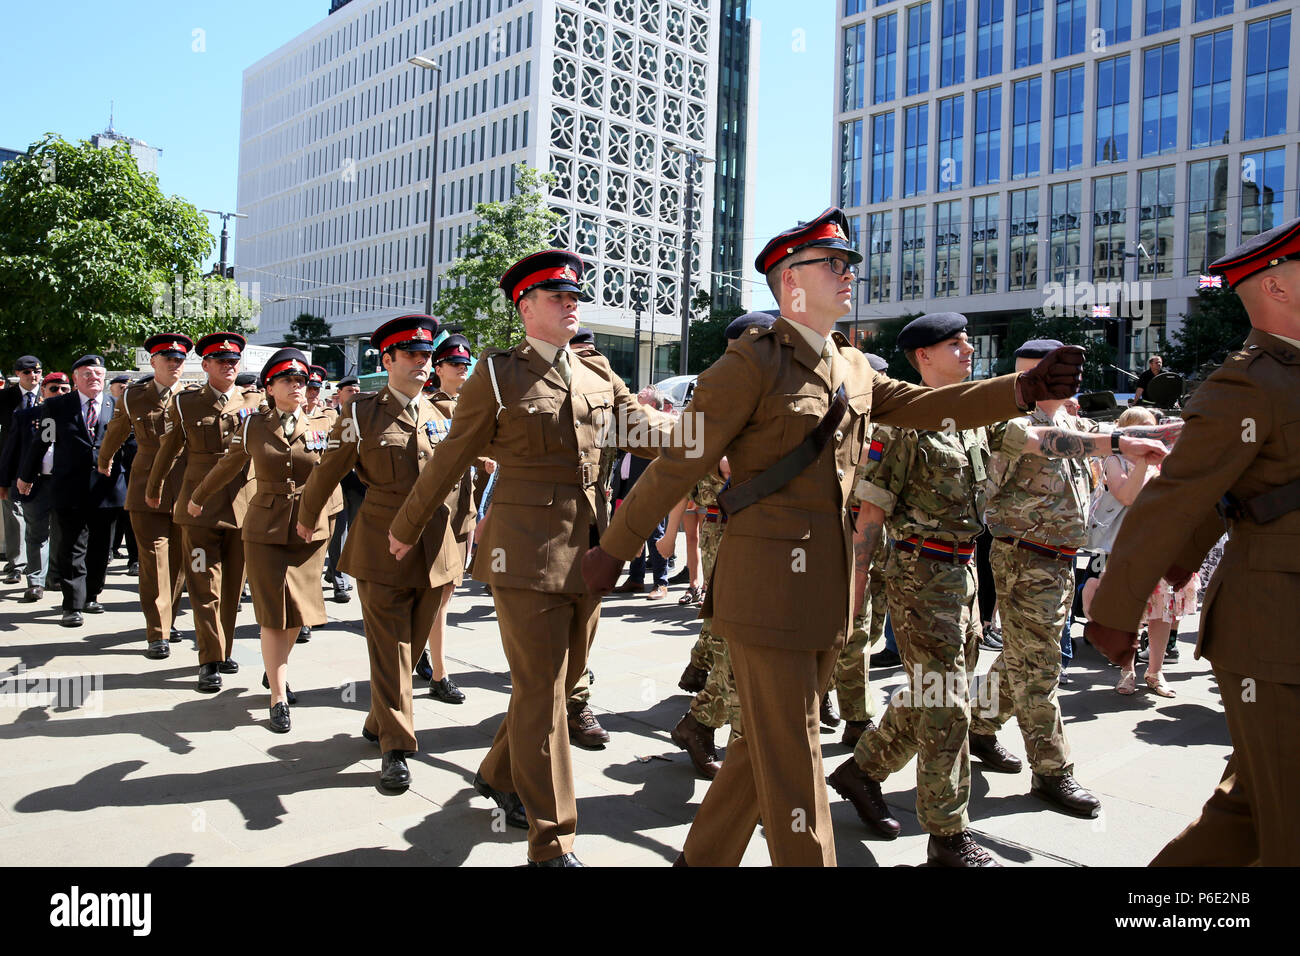 Manchester, UK, 30 June 2018. Parade of forces during celebrations of Armed Forces Day where the public are given the opportunity to meet members of the armed forces and talk to them about the work they do, St Peters Square, Manchester, 30th June, 2018 (C)Barbara Cook/Alamy Live News Stock Photo